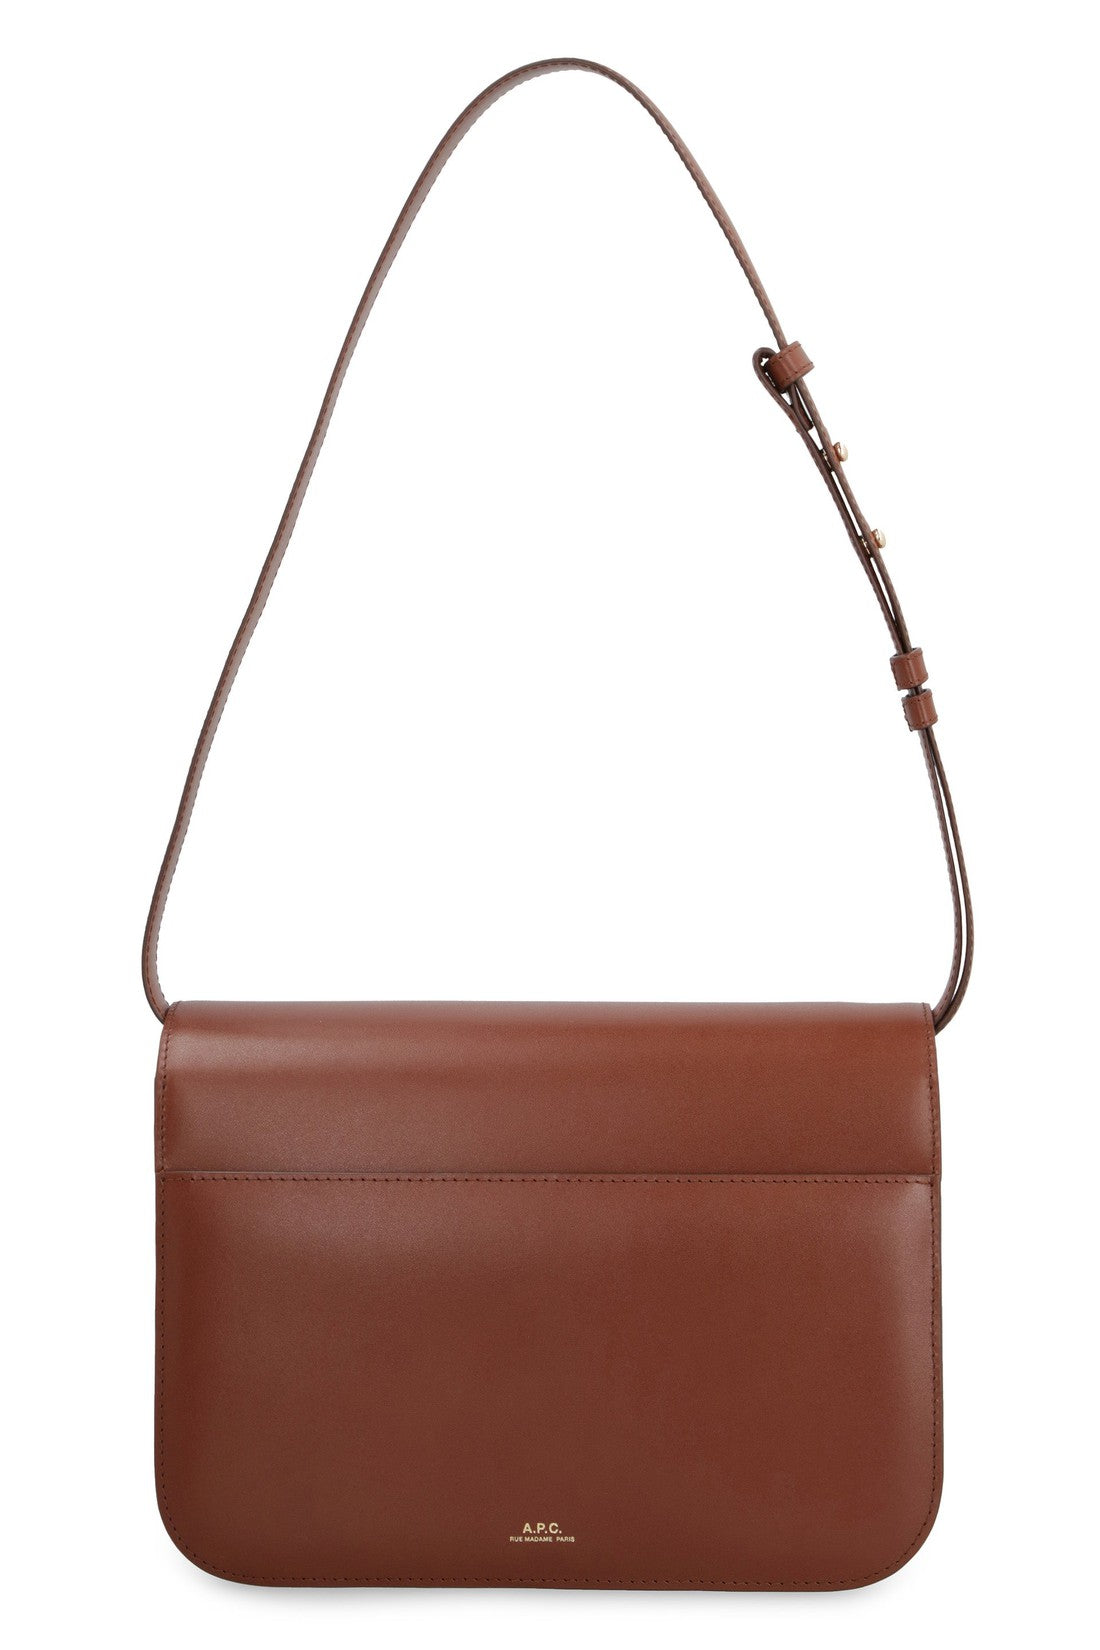 A.P.C.-OUTLET-SALE-Astra leather small bag-ARCHIVIST